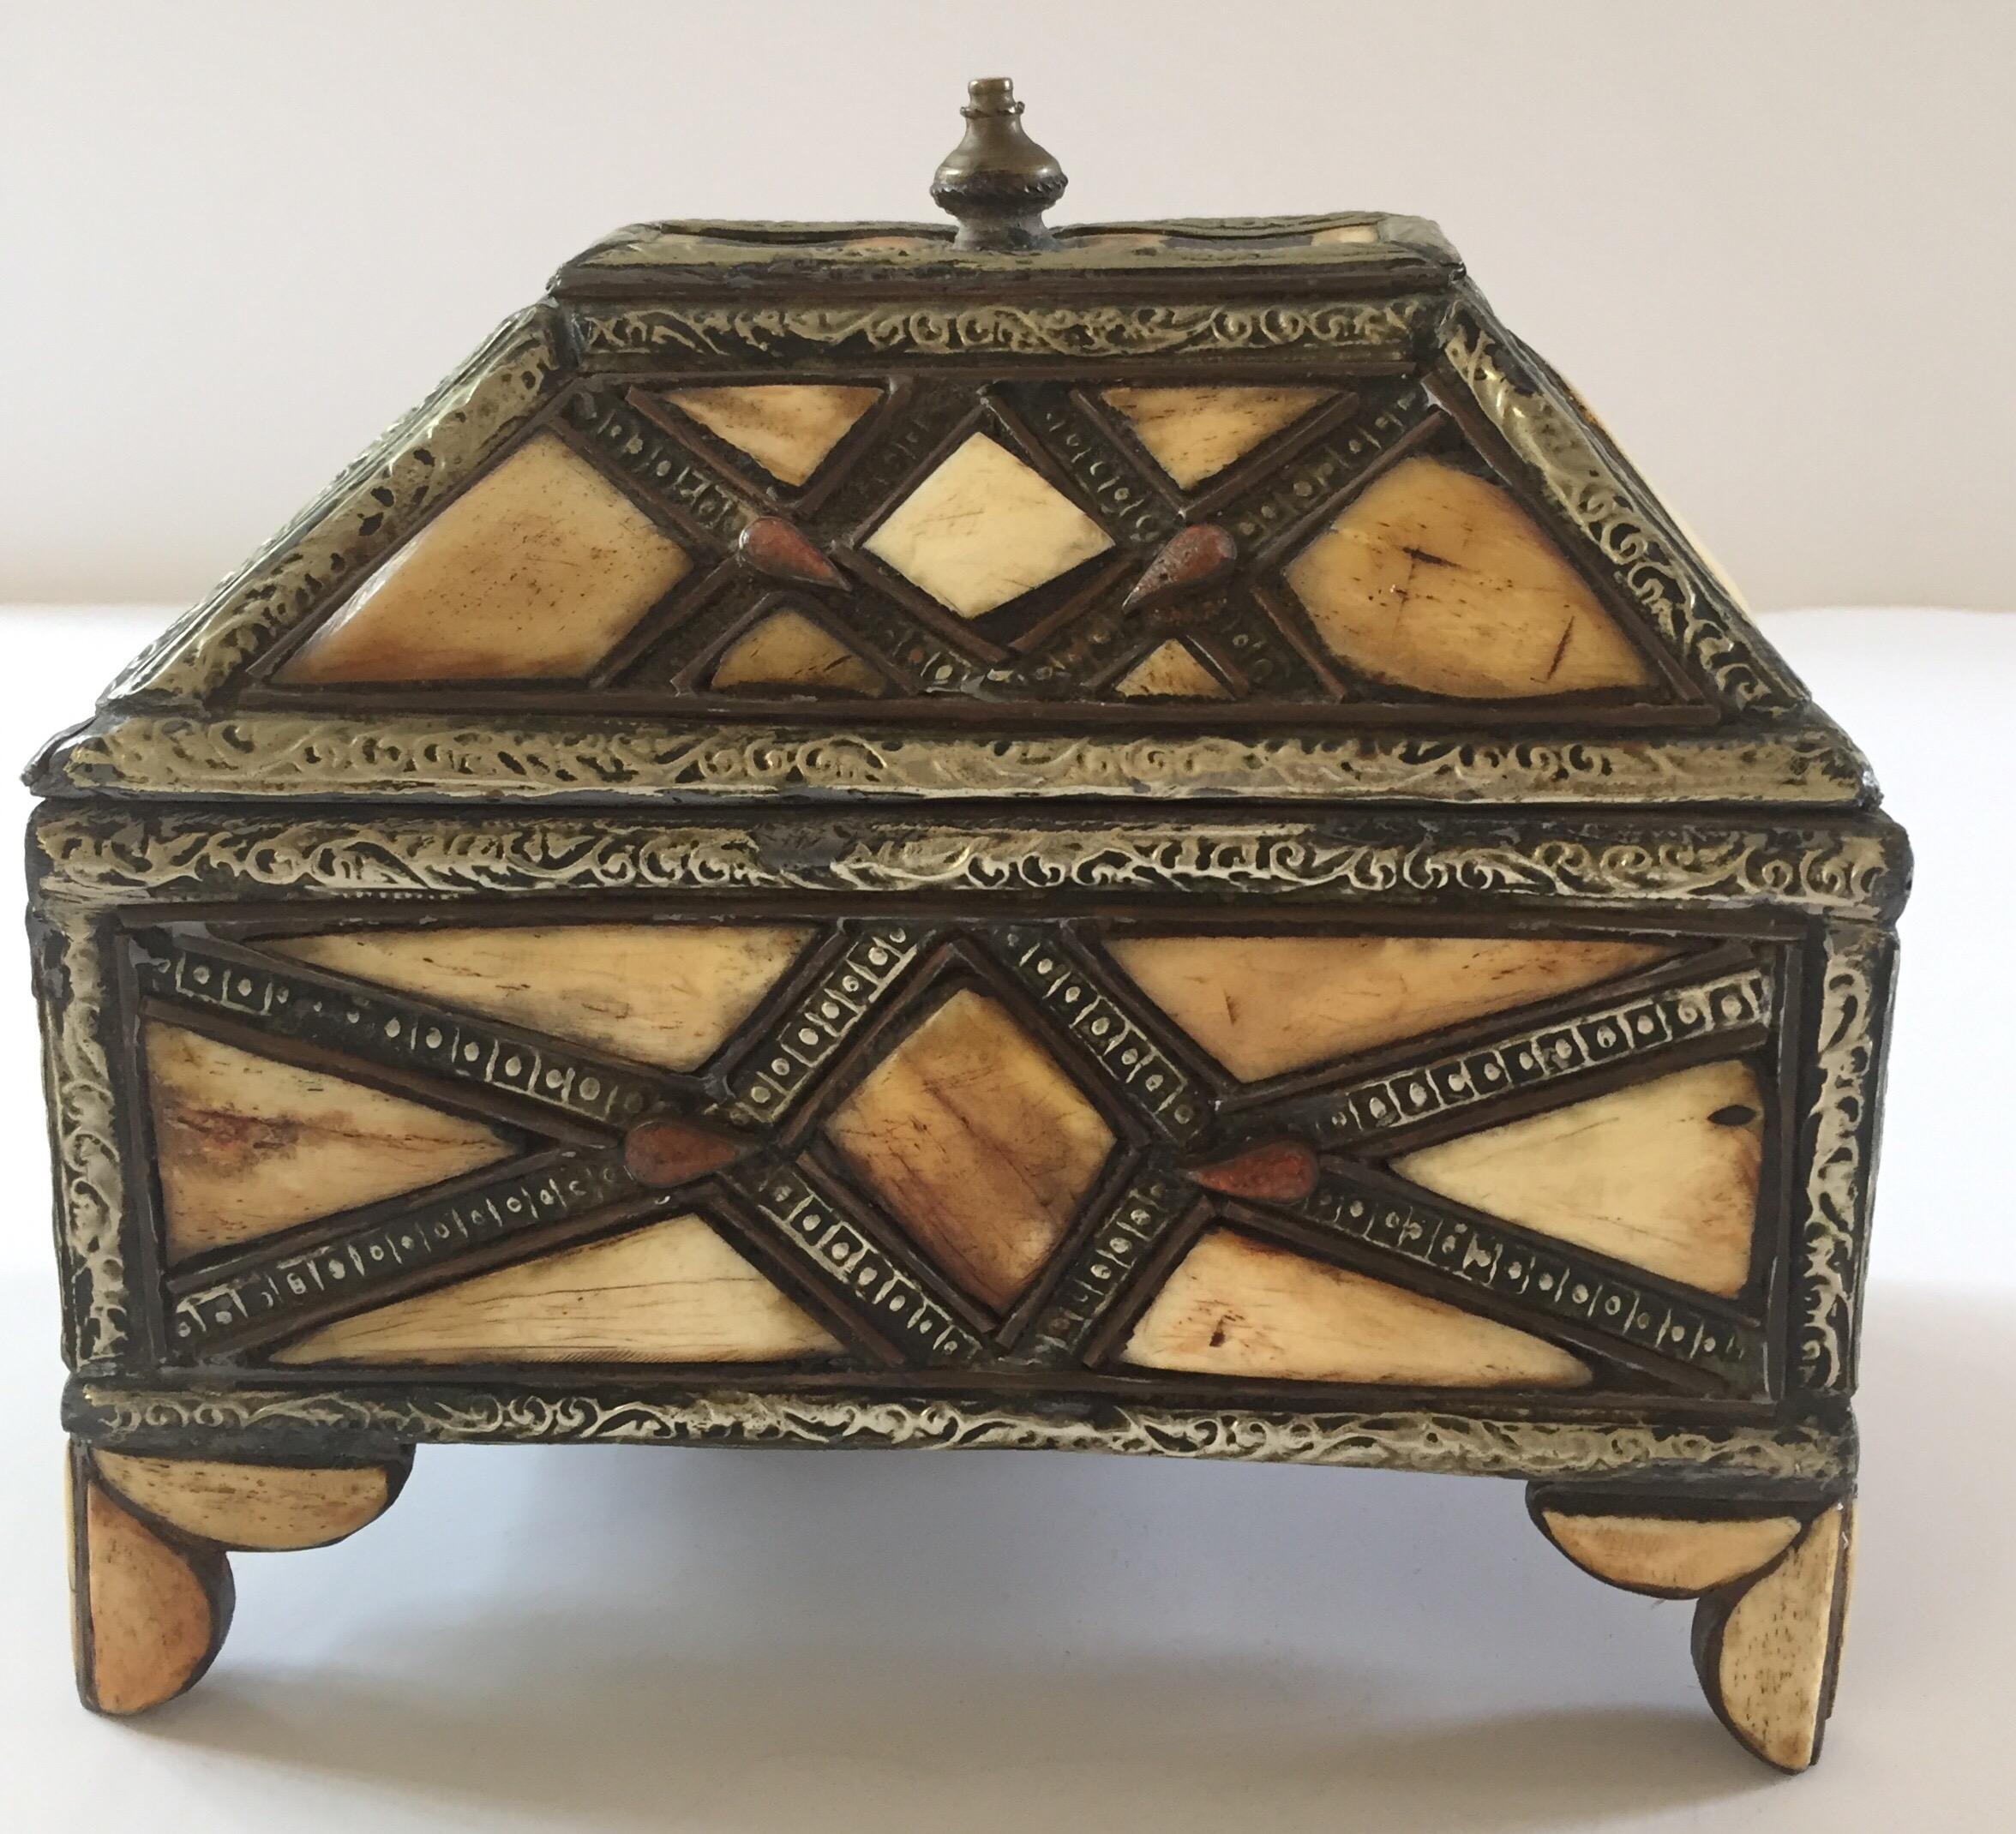 Moroccan decorative footed jewelry box inlaid with camel bone and brass.
Moroccan Moorish jewelry box hand-carved all-over with silvered brass and camel bone inlaid.
Leather lined inside.
One of a kind Moroccan islamic art-work handcrafted in